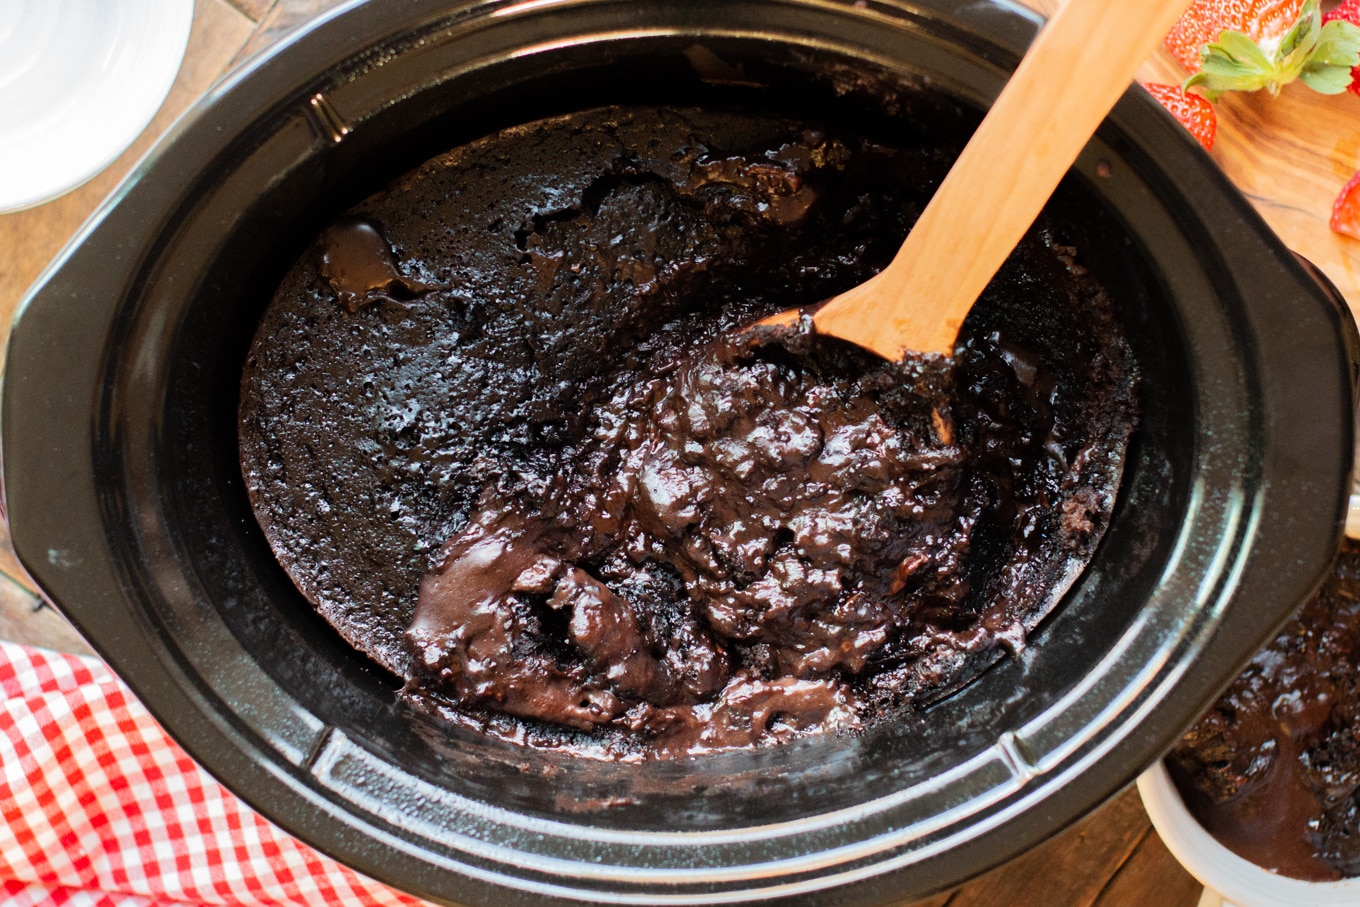 cooked lave cake in a slow cooker with red and white napkin on the side.